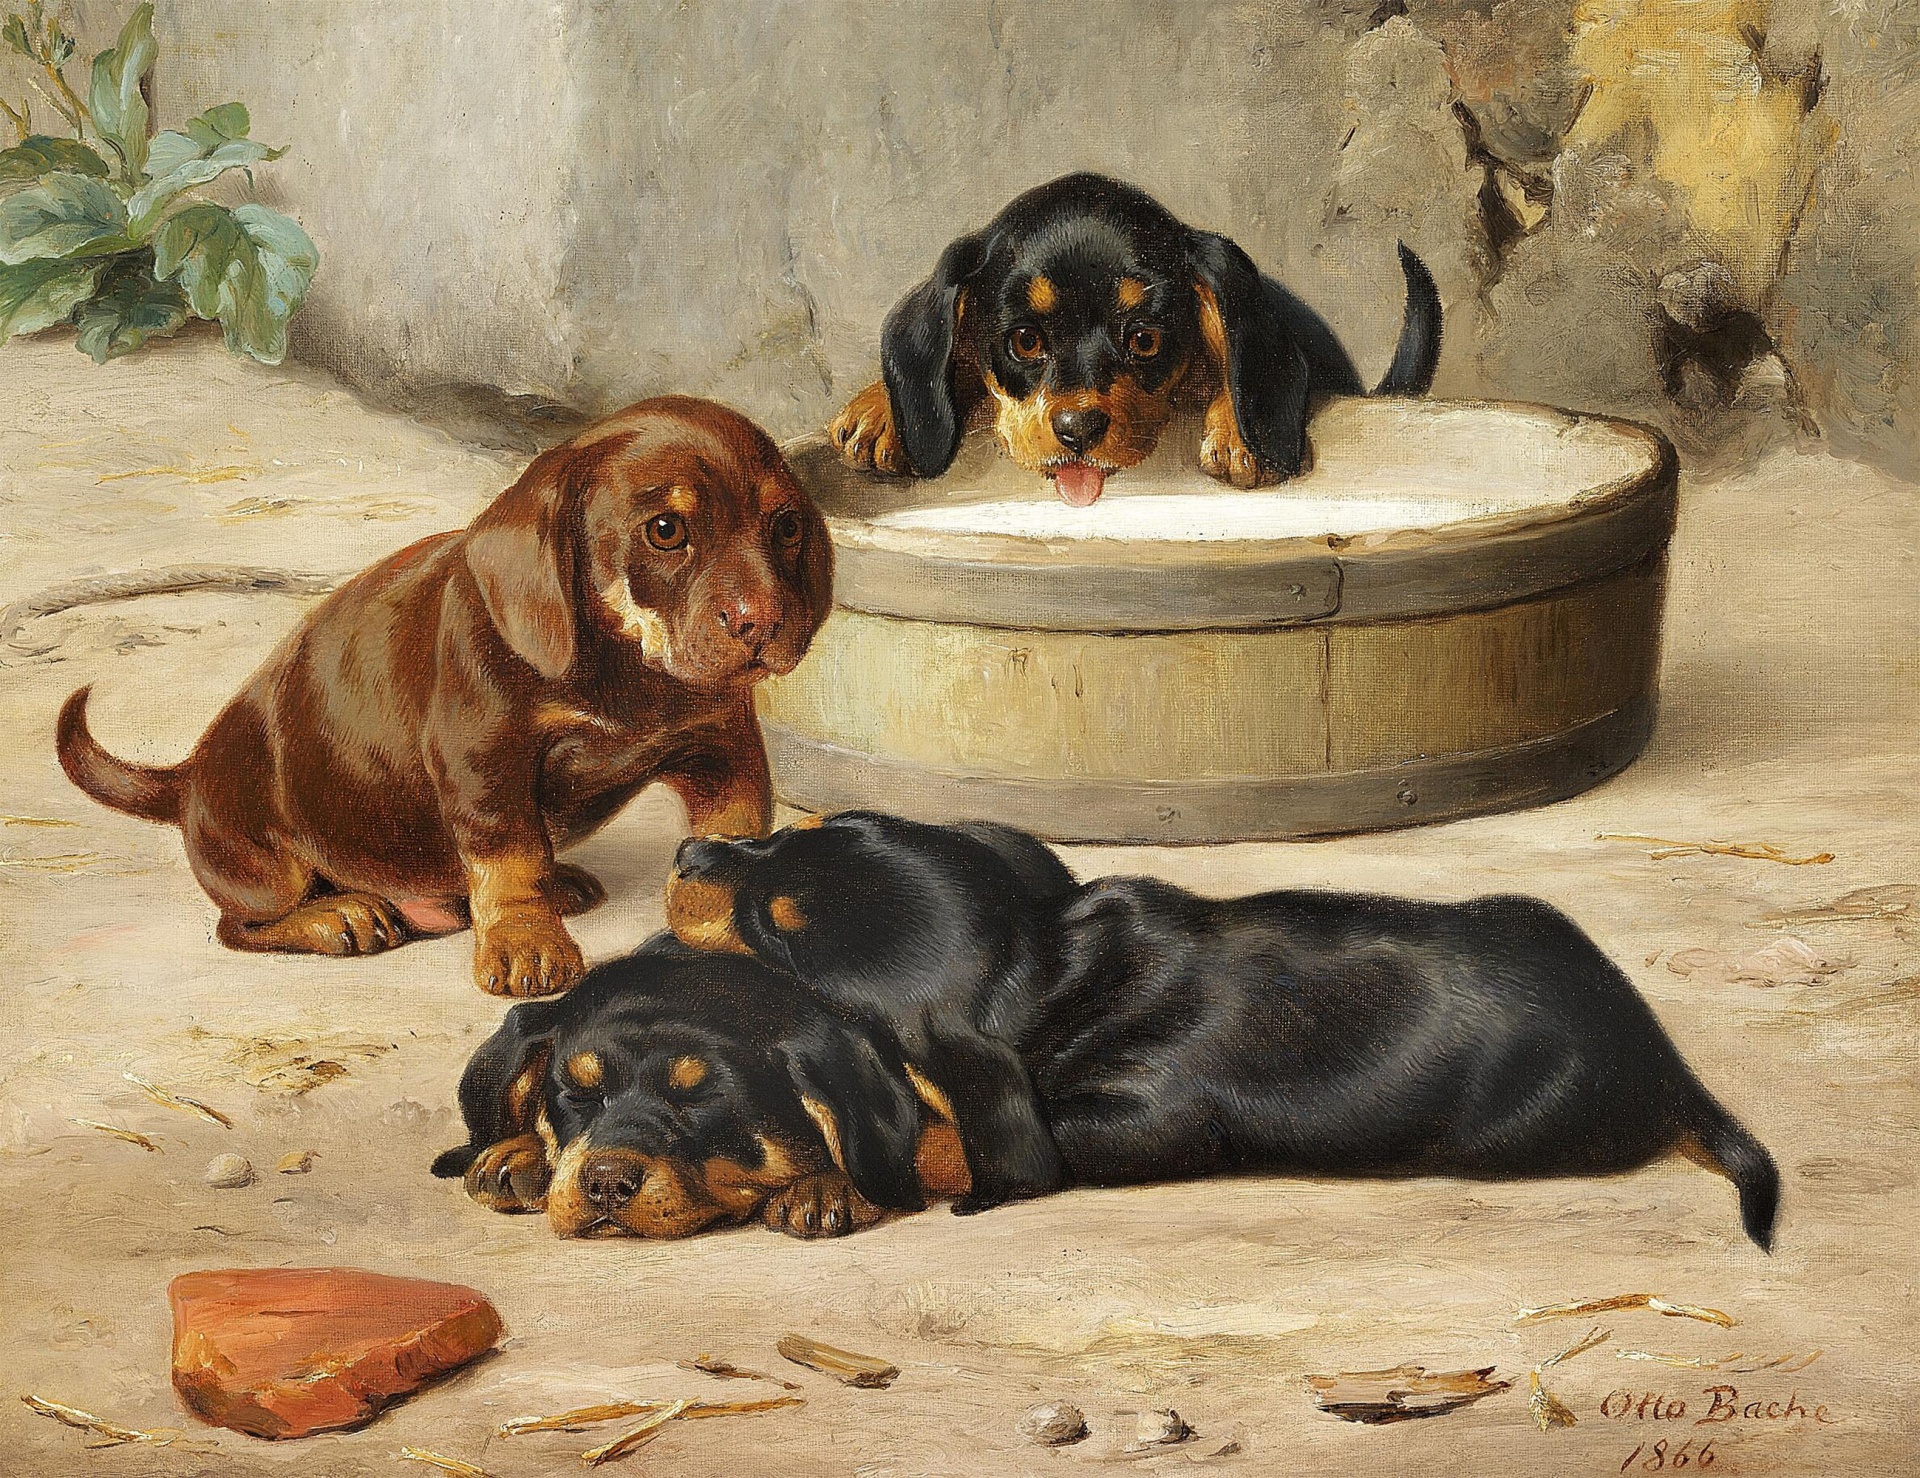 Vintage antique art painting of cute dachshund puppy dogs poster, print, card by artist Otto Bache